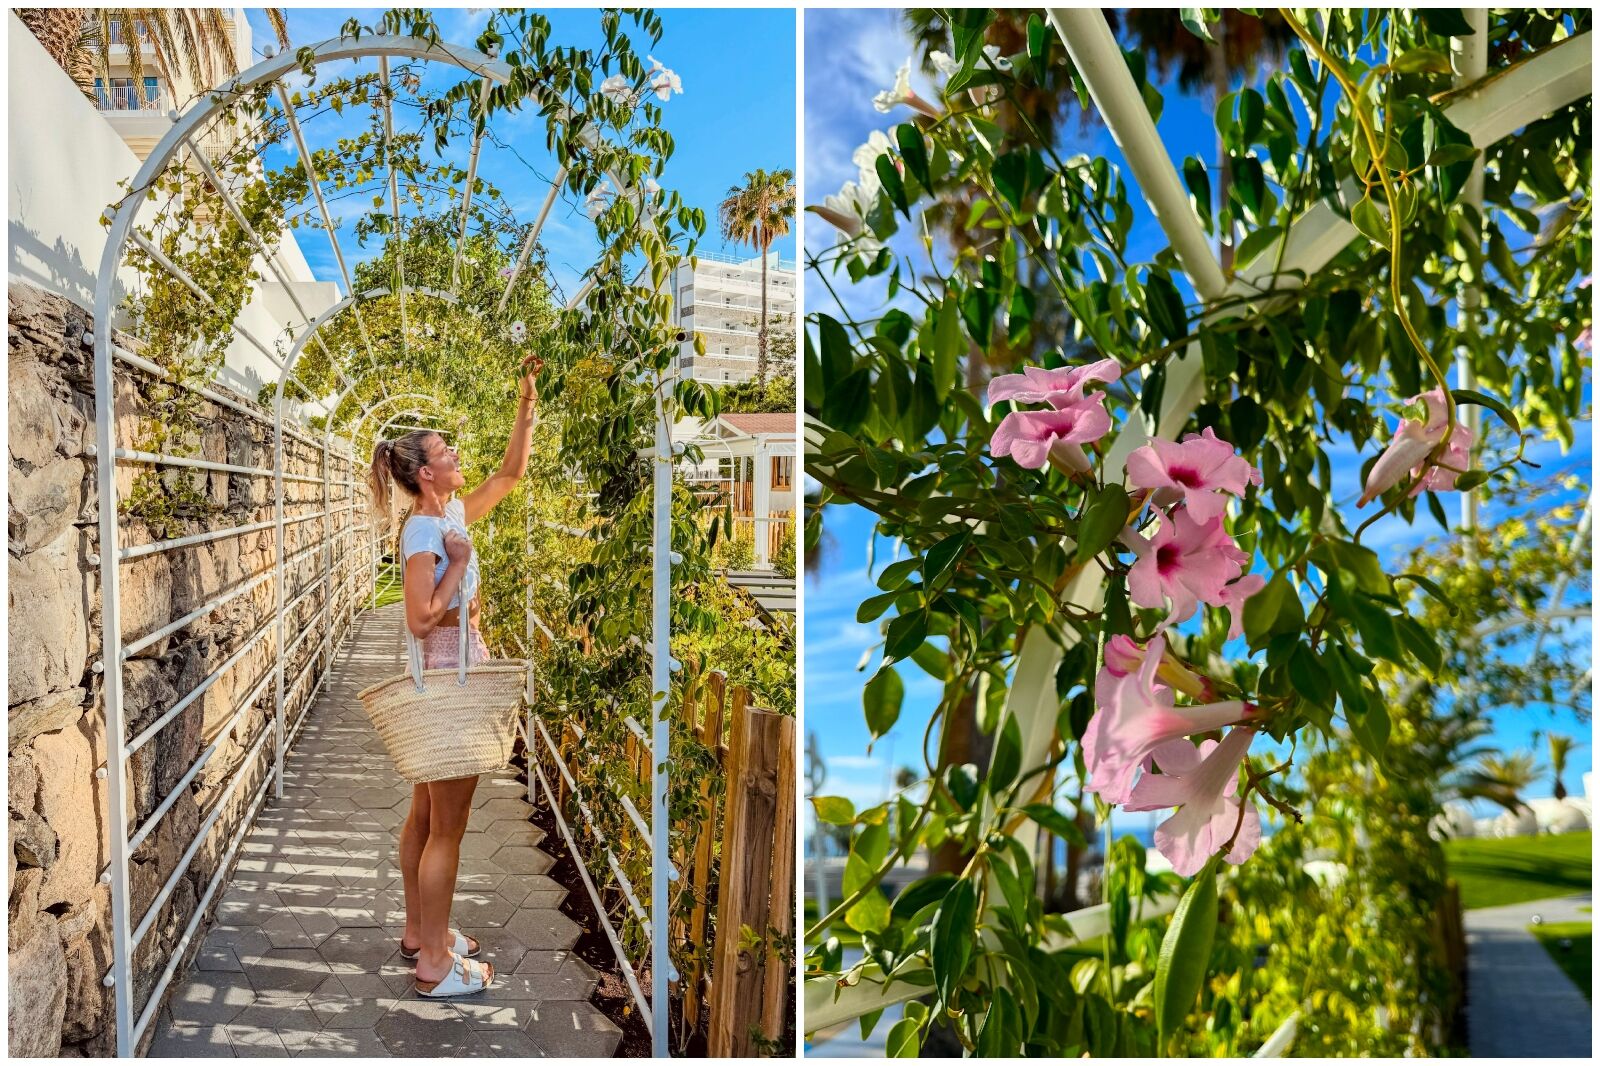 Girl in garden with flowers at Paradisus by Melia Gran Canaria